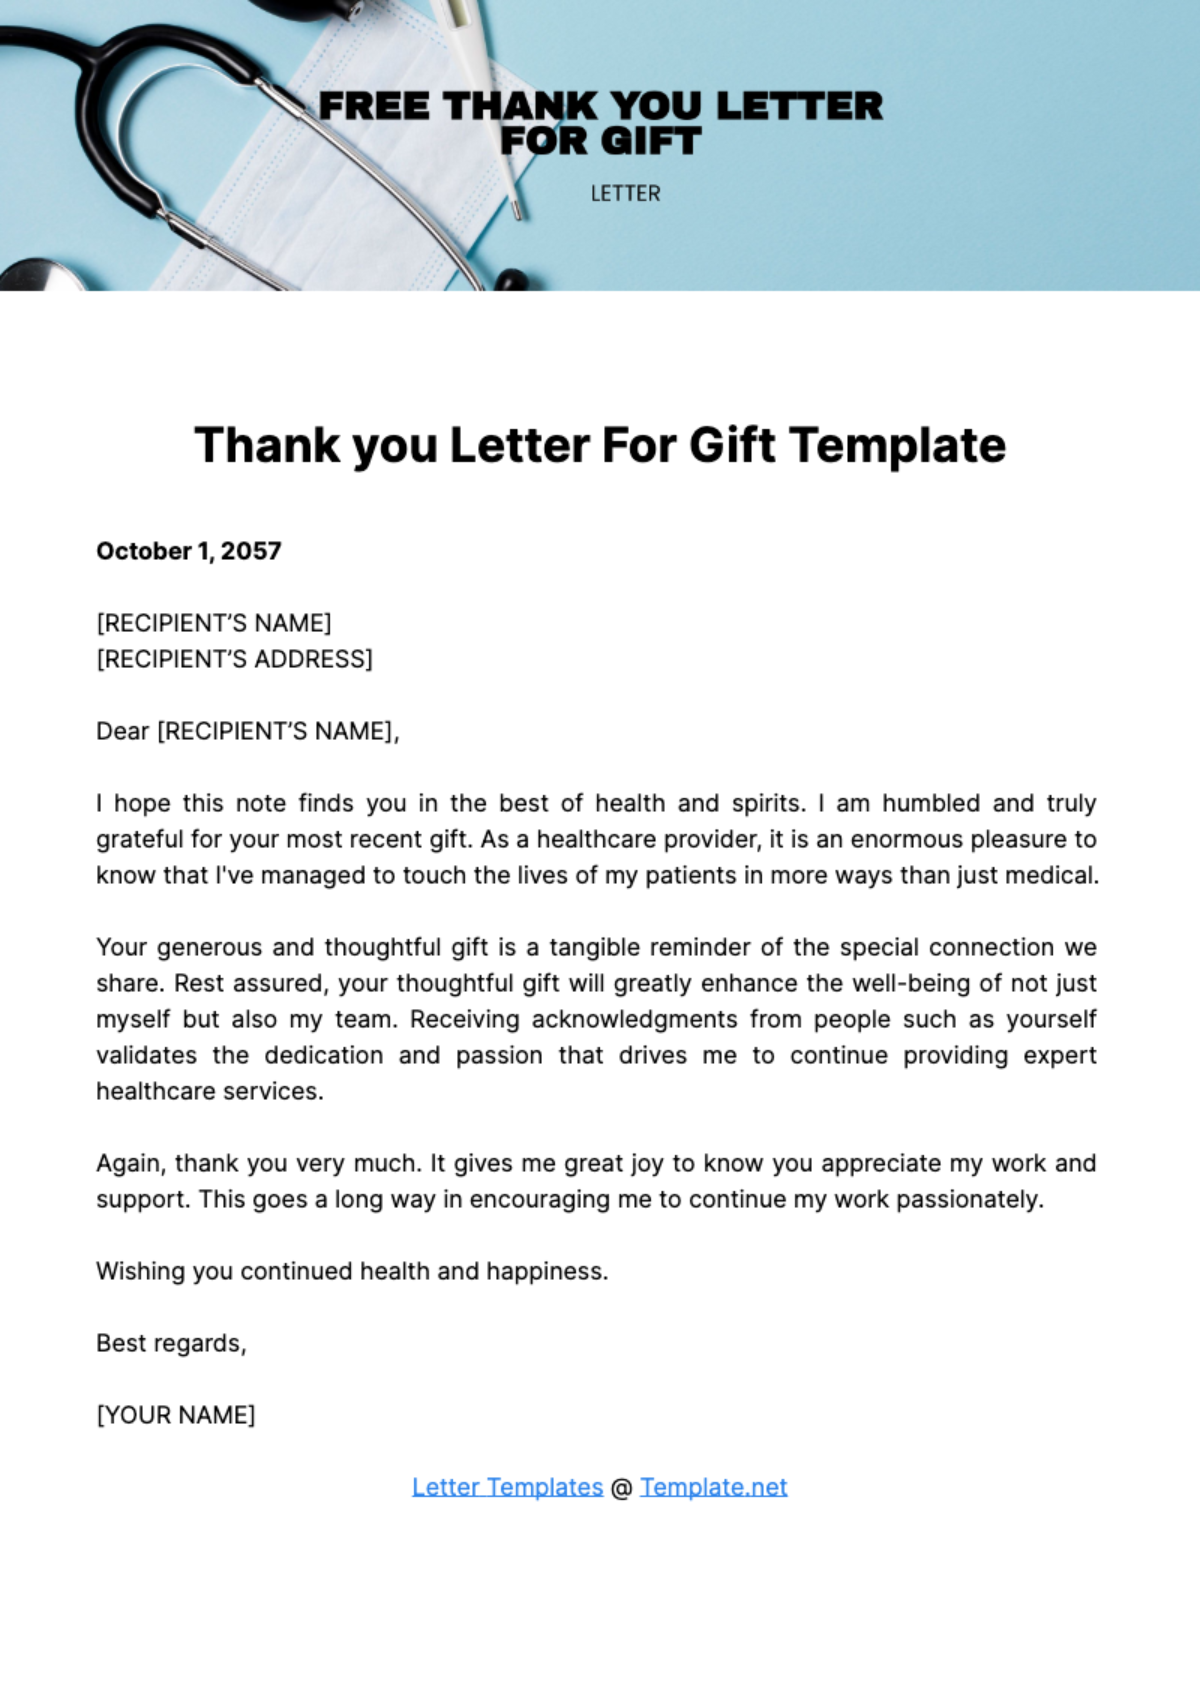 Thank you Letter for Gift Template